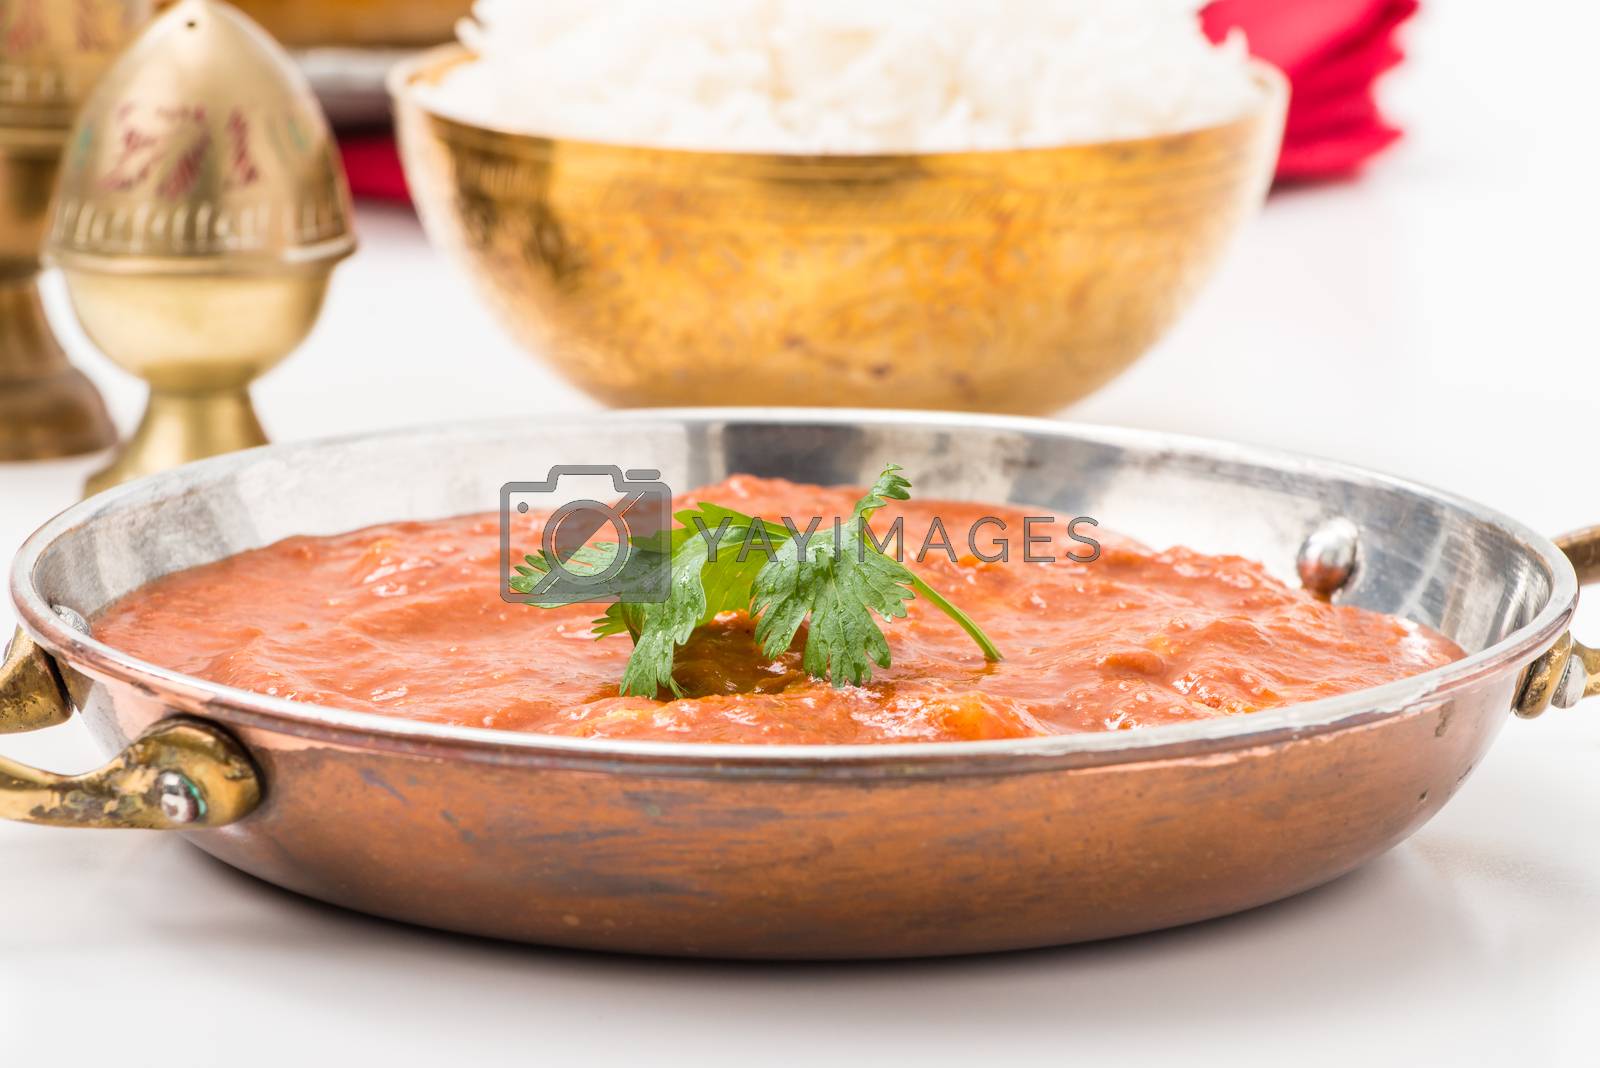 Royalty free image of East Indian Butter Chicken by billberryphotography